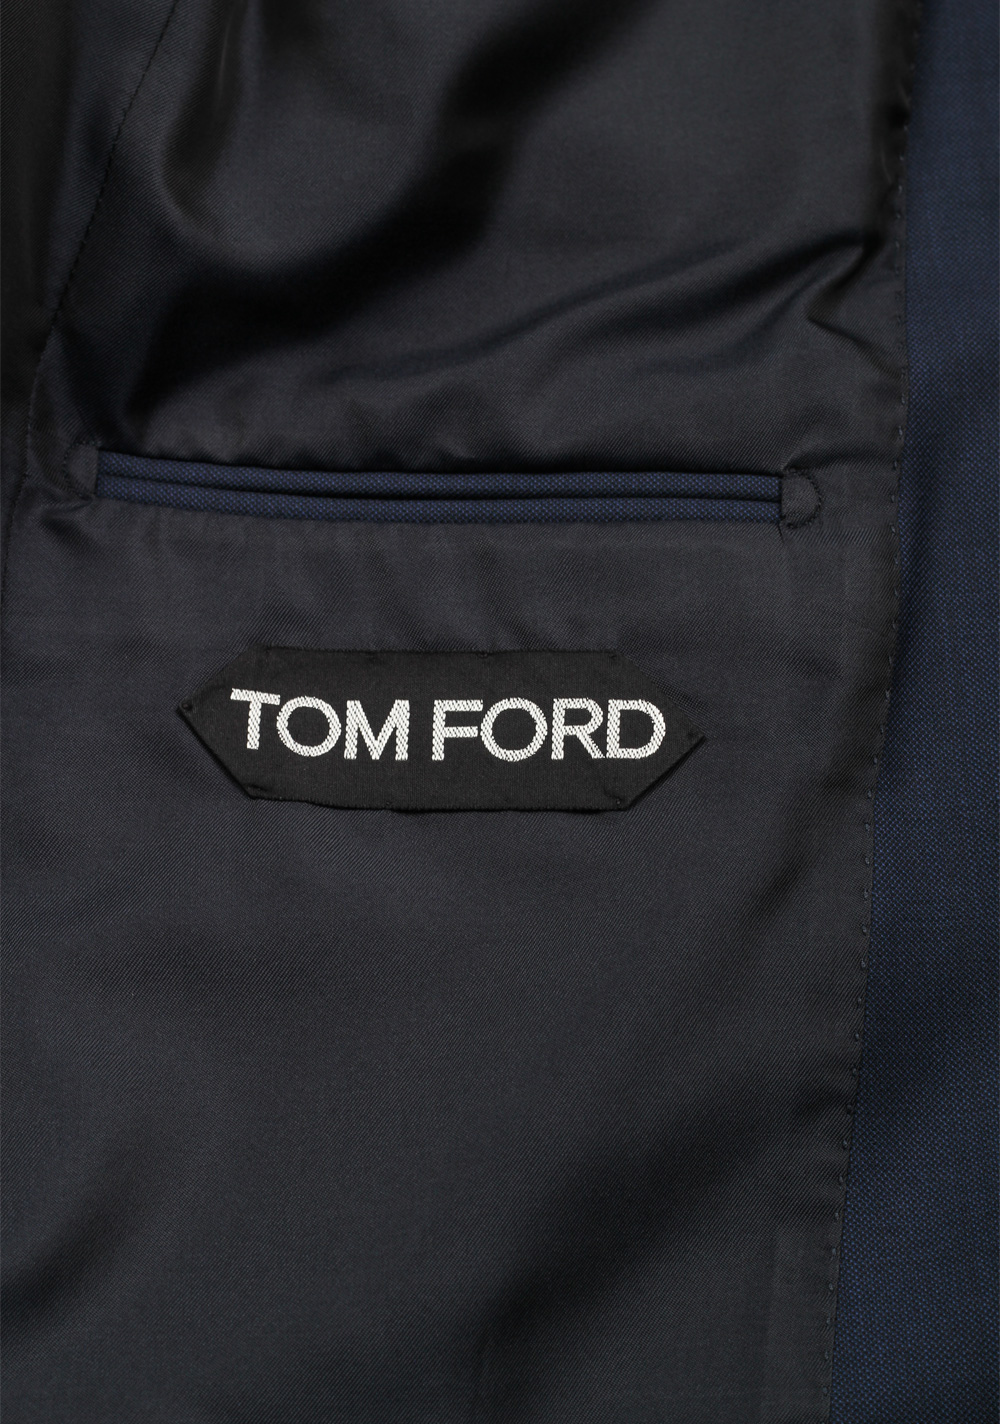 TOM FORD Windsor Solid Blue Suit Size 48 / 38R U.S. Wool Fit A | Costume Limité